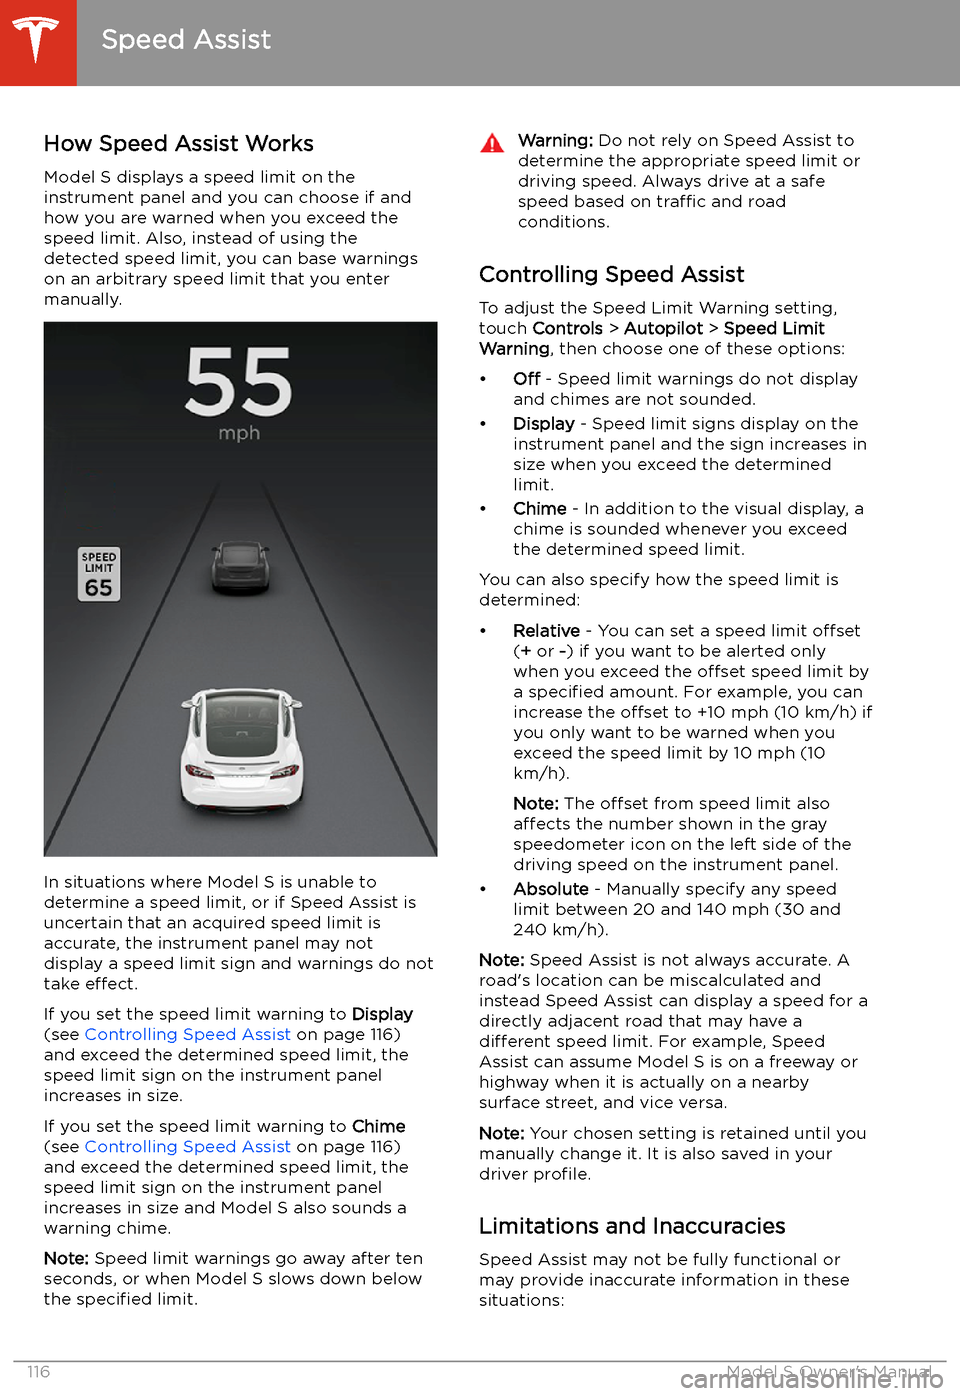 TESLA MODEL S 2020  Owners Manual Speed Assist
How Speed Assist Works
Model S displays a speed limit on the
instrument panel and you can choose if and how you are warned when you exceed the
speed limit. Also, instead of using the dete